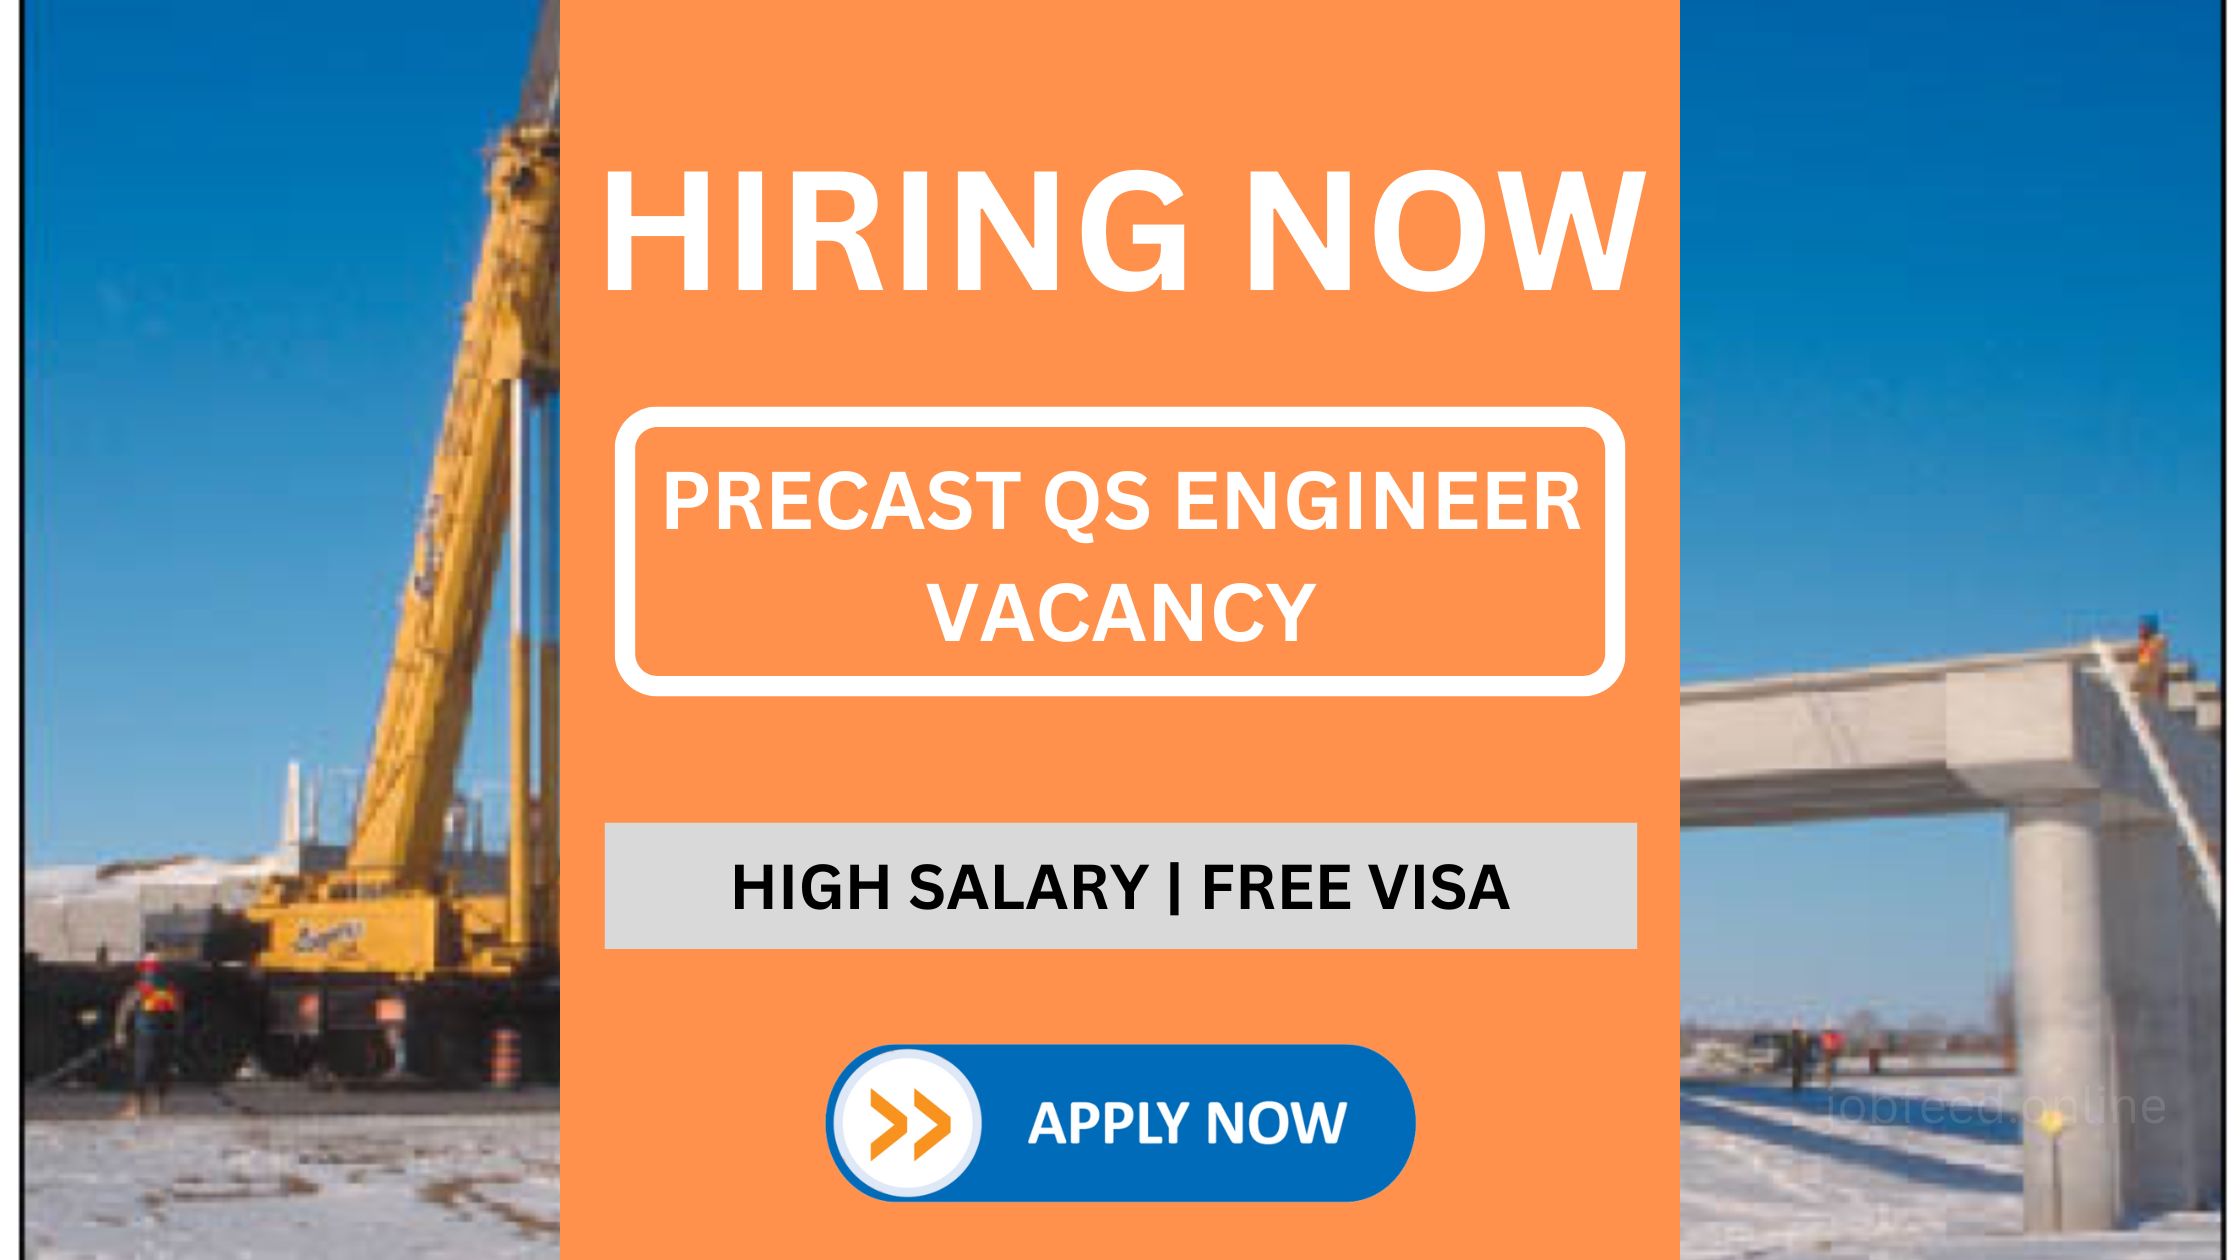 Precast QS Engineer - Experienced Candidates can Apply